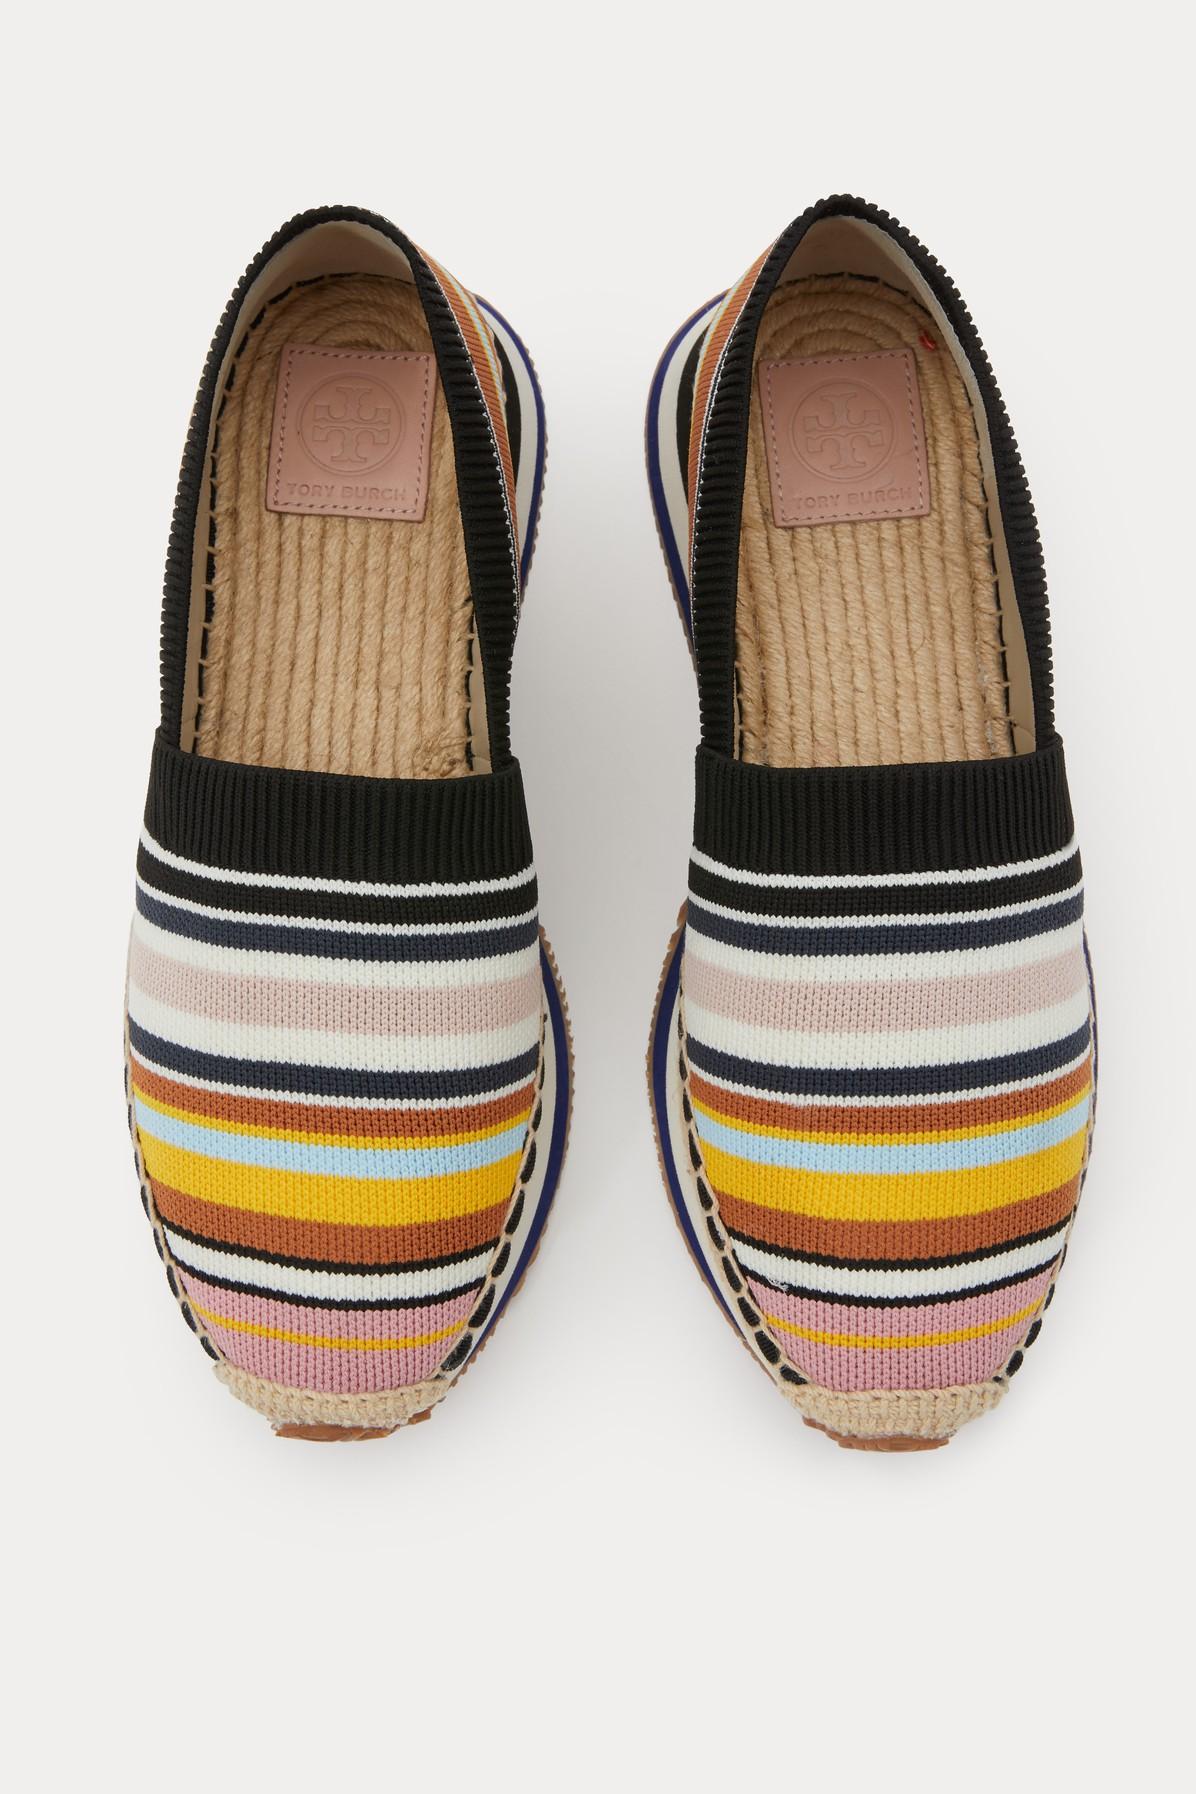 Espadrilles Tory Burch - Daisy logo detailed slip-on shoes - 59600004